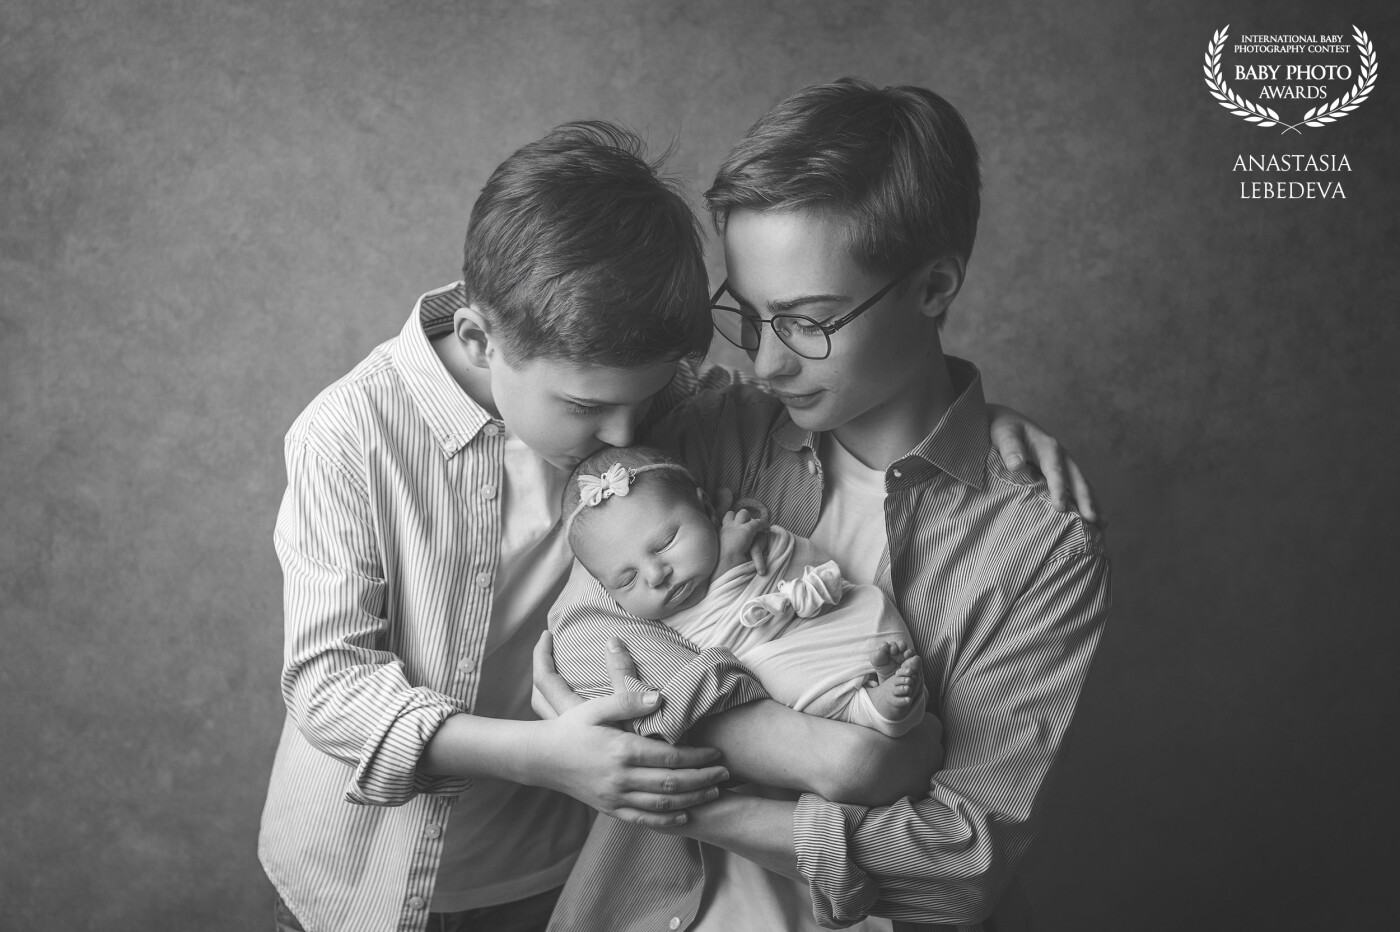 In this photo, the brothers are holding their newborn sister in their arms. I see happiness, love, tenderness and care on their faces! Photographing such wonderful children was an unforgettable pleasure and joy.